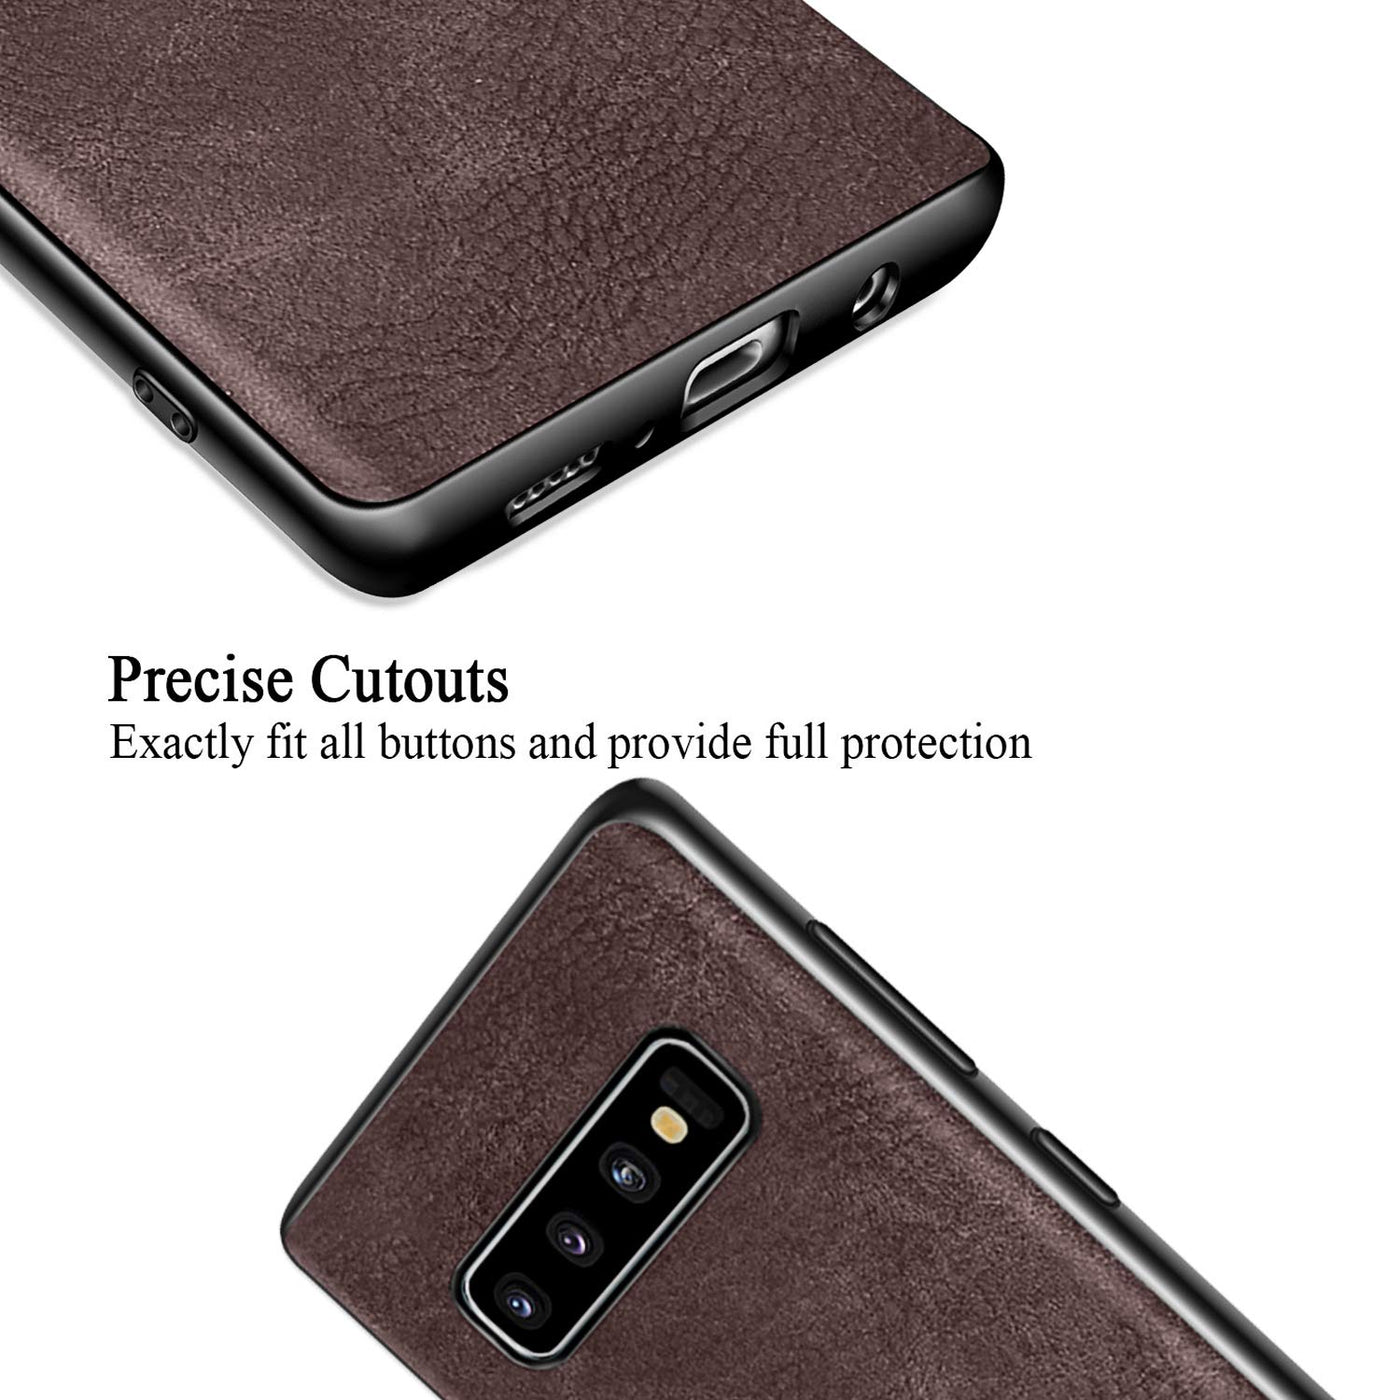 Samsung Galaxy S10 Plus 360 degree protection leather back case cover by excelsior